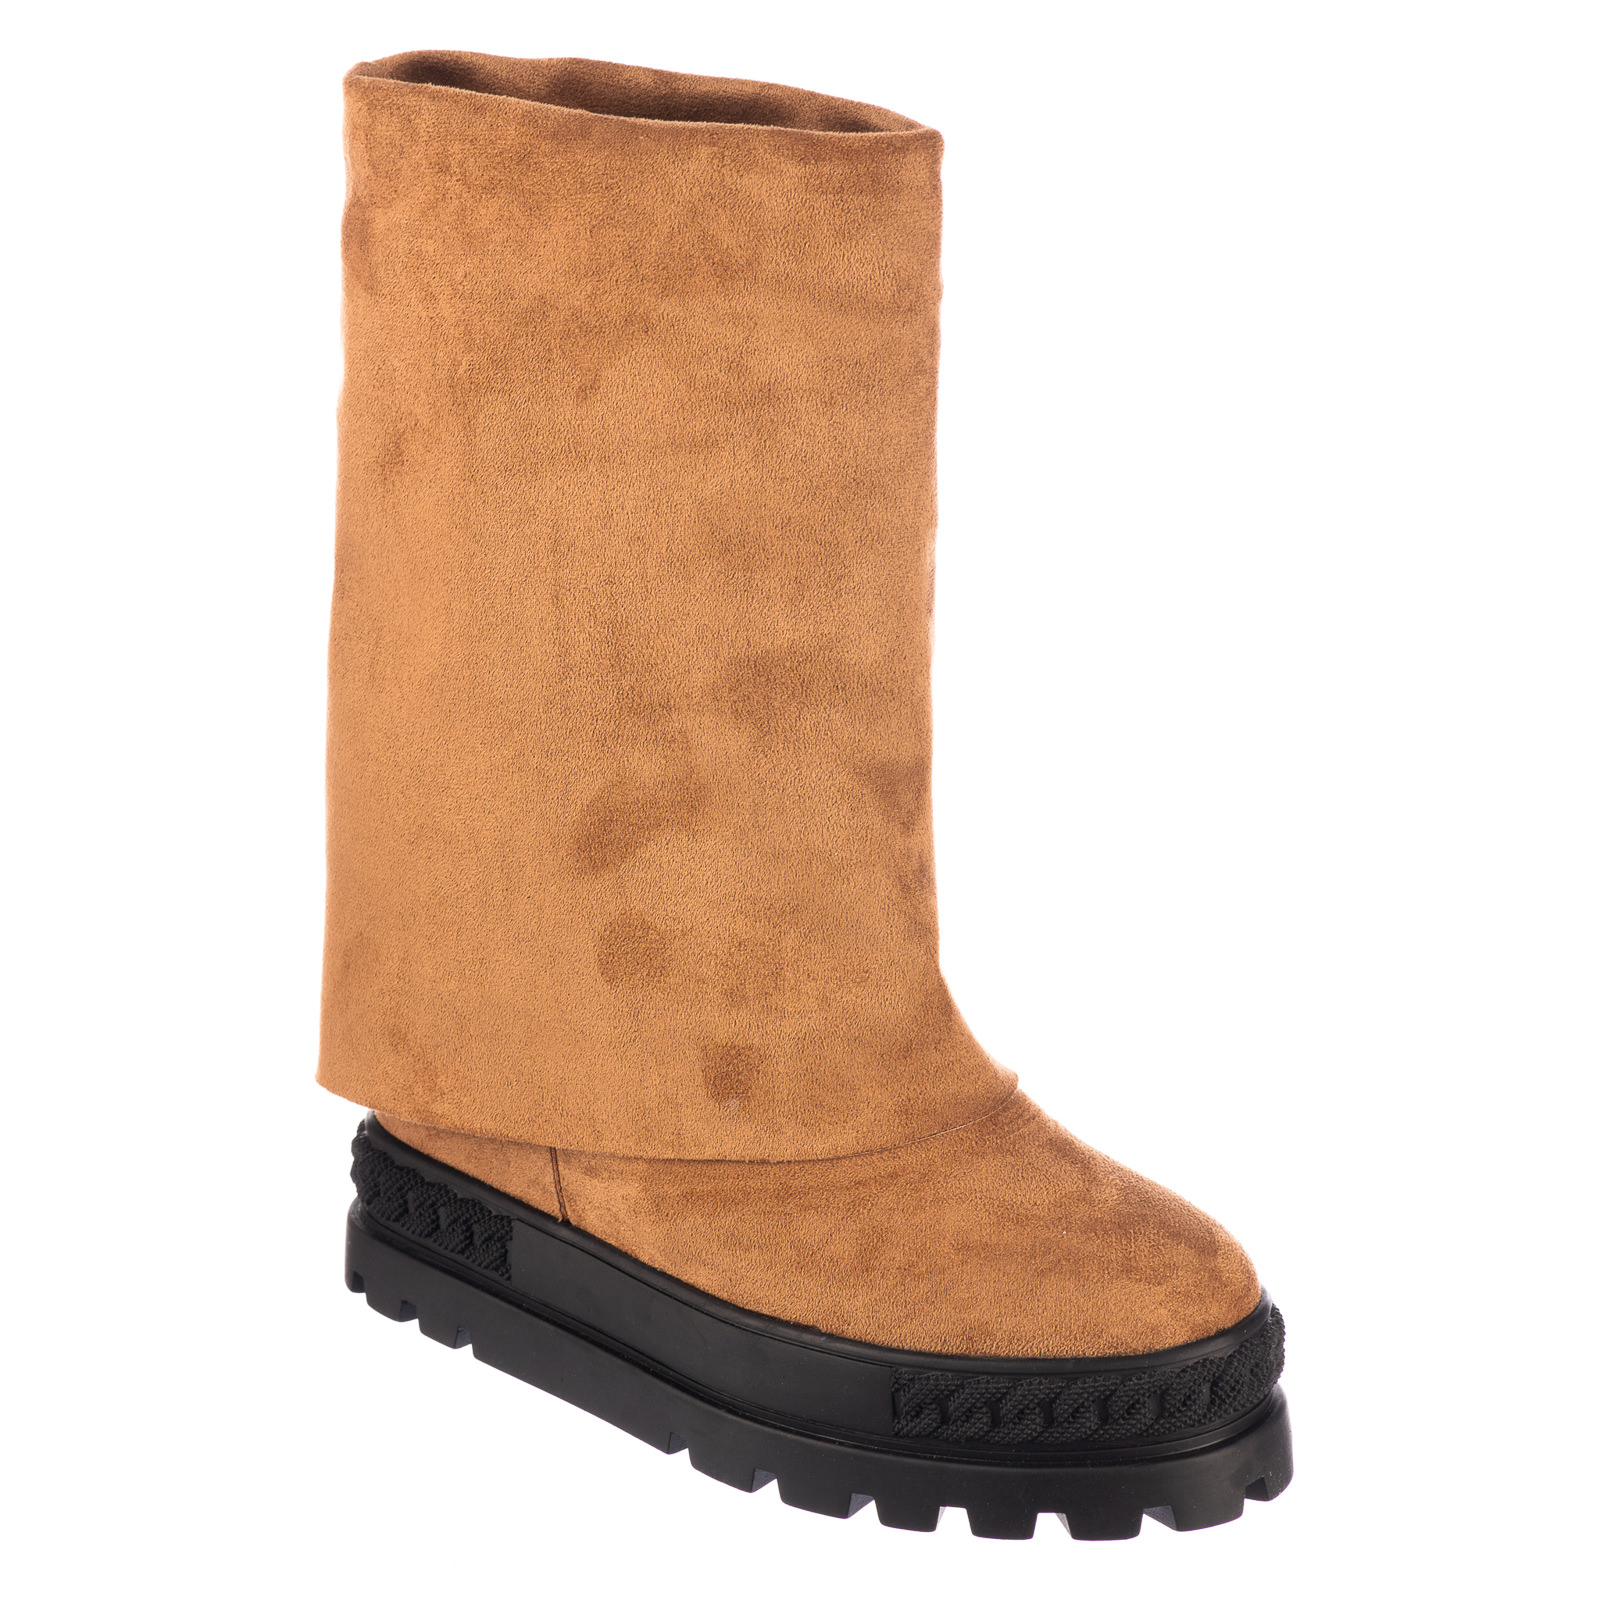 Women ankle boots B426 - CAMEL